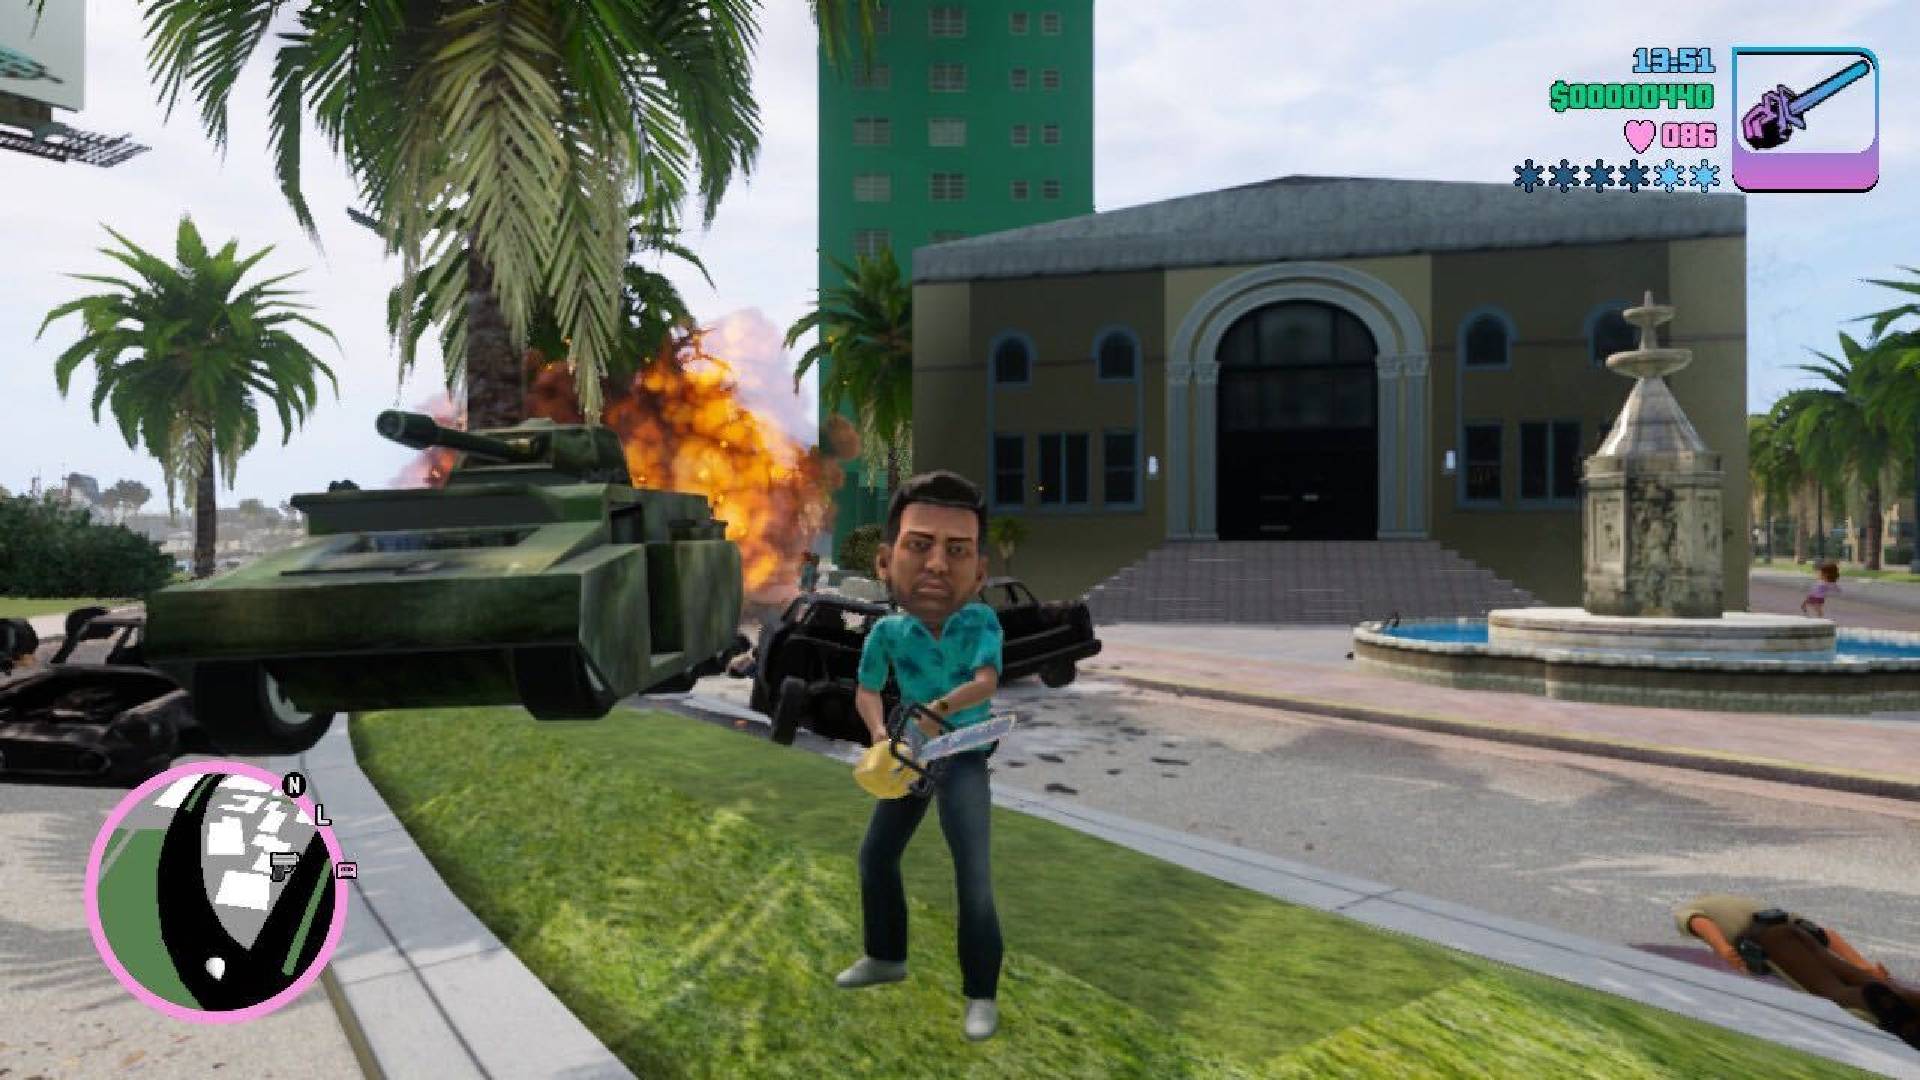 A male character in a Hawaiian shirt stands in front of a burning tank holding a chainsaw